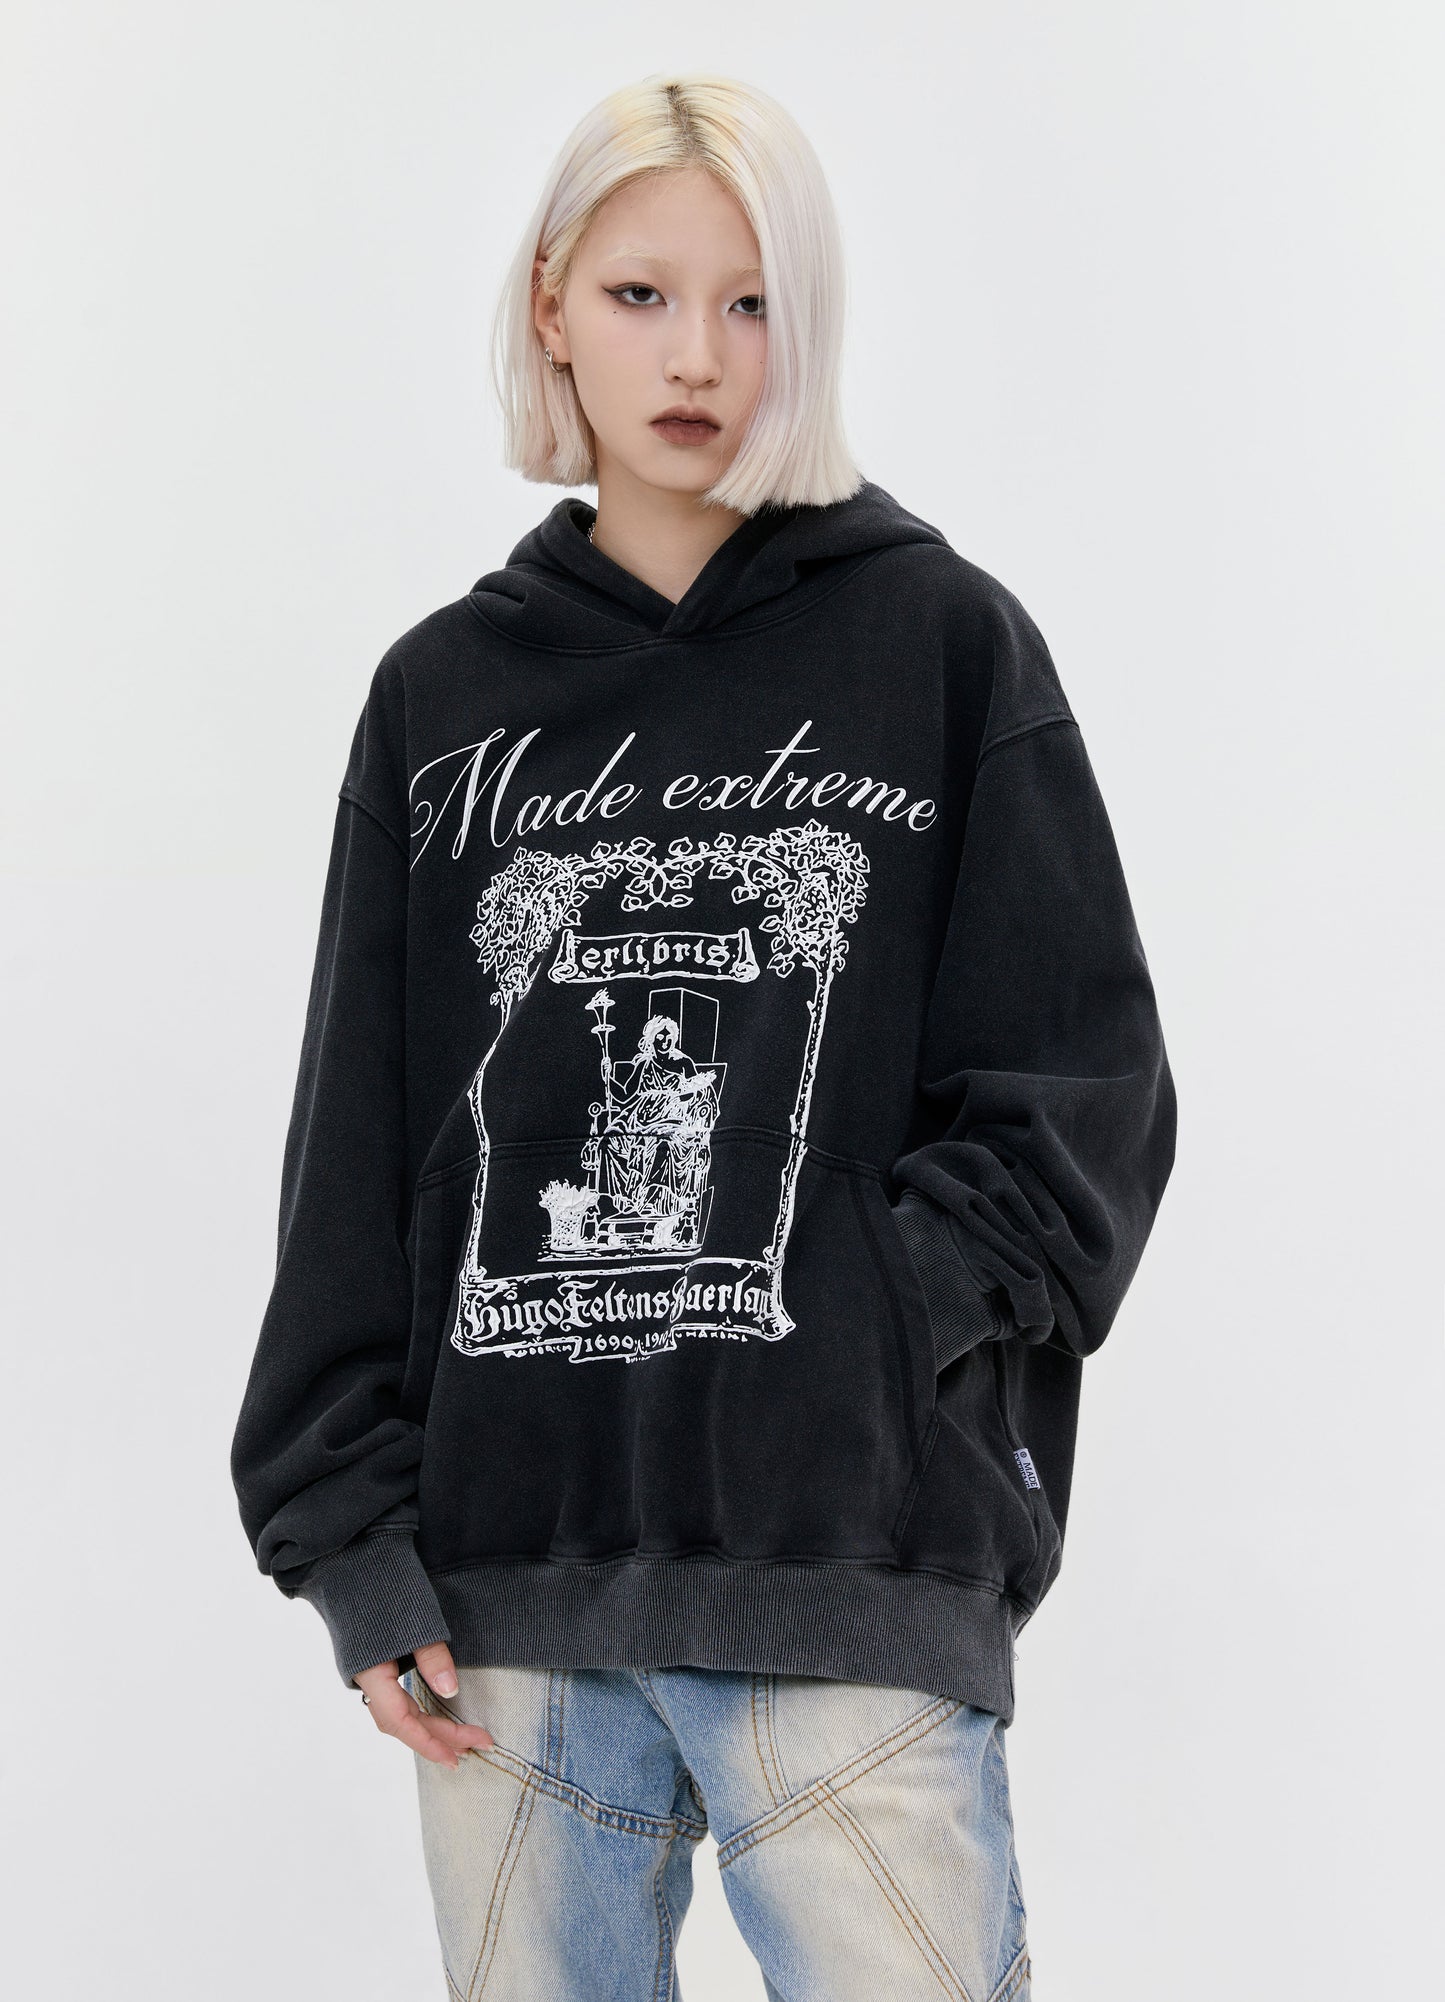 THE RULE WITH NO EXCEPTIONS HOODIE